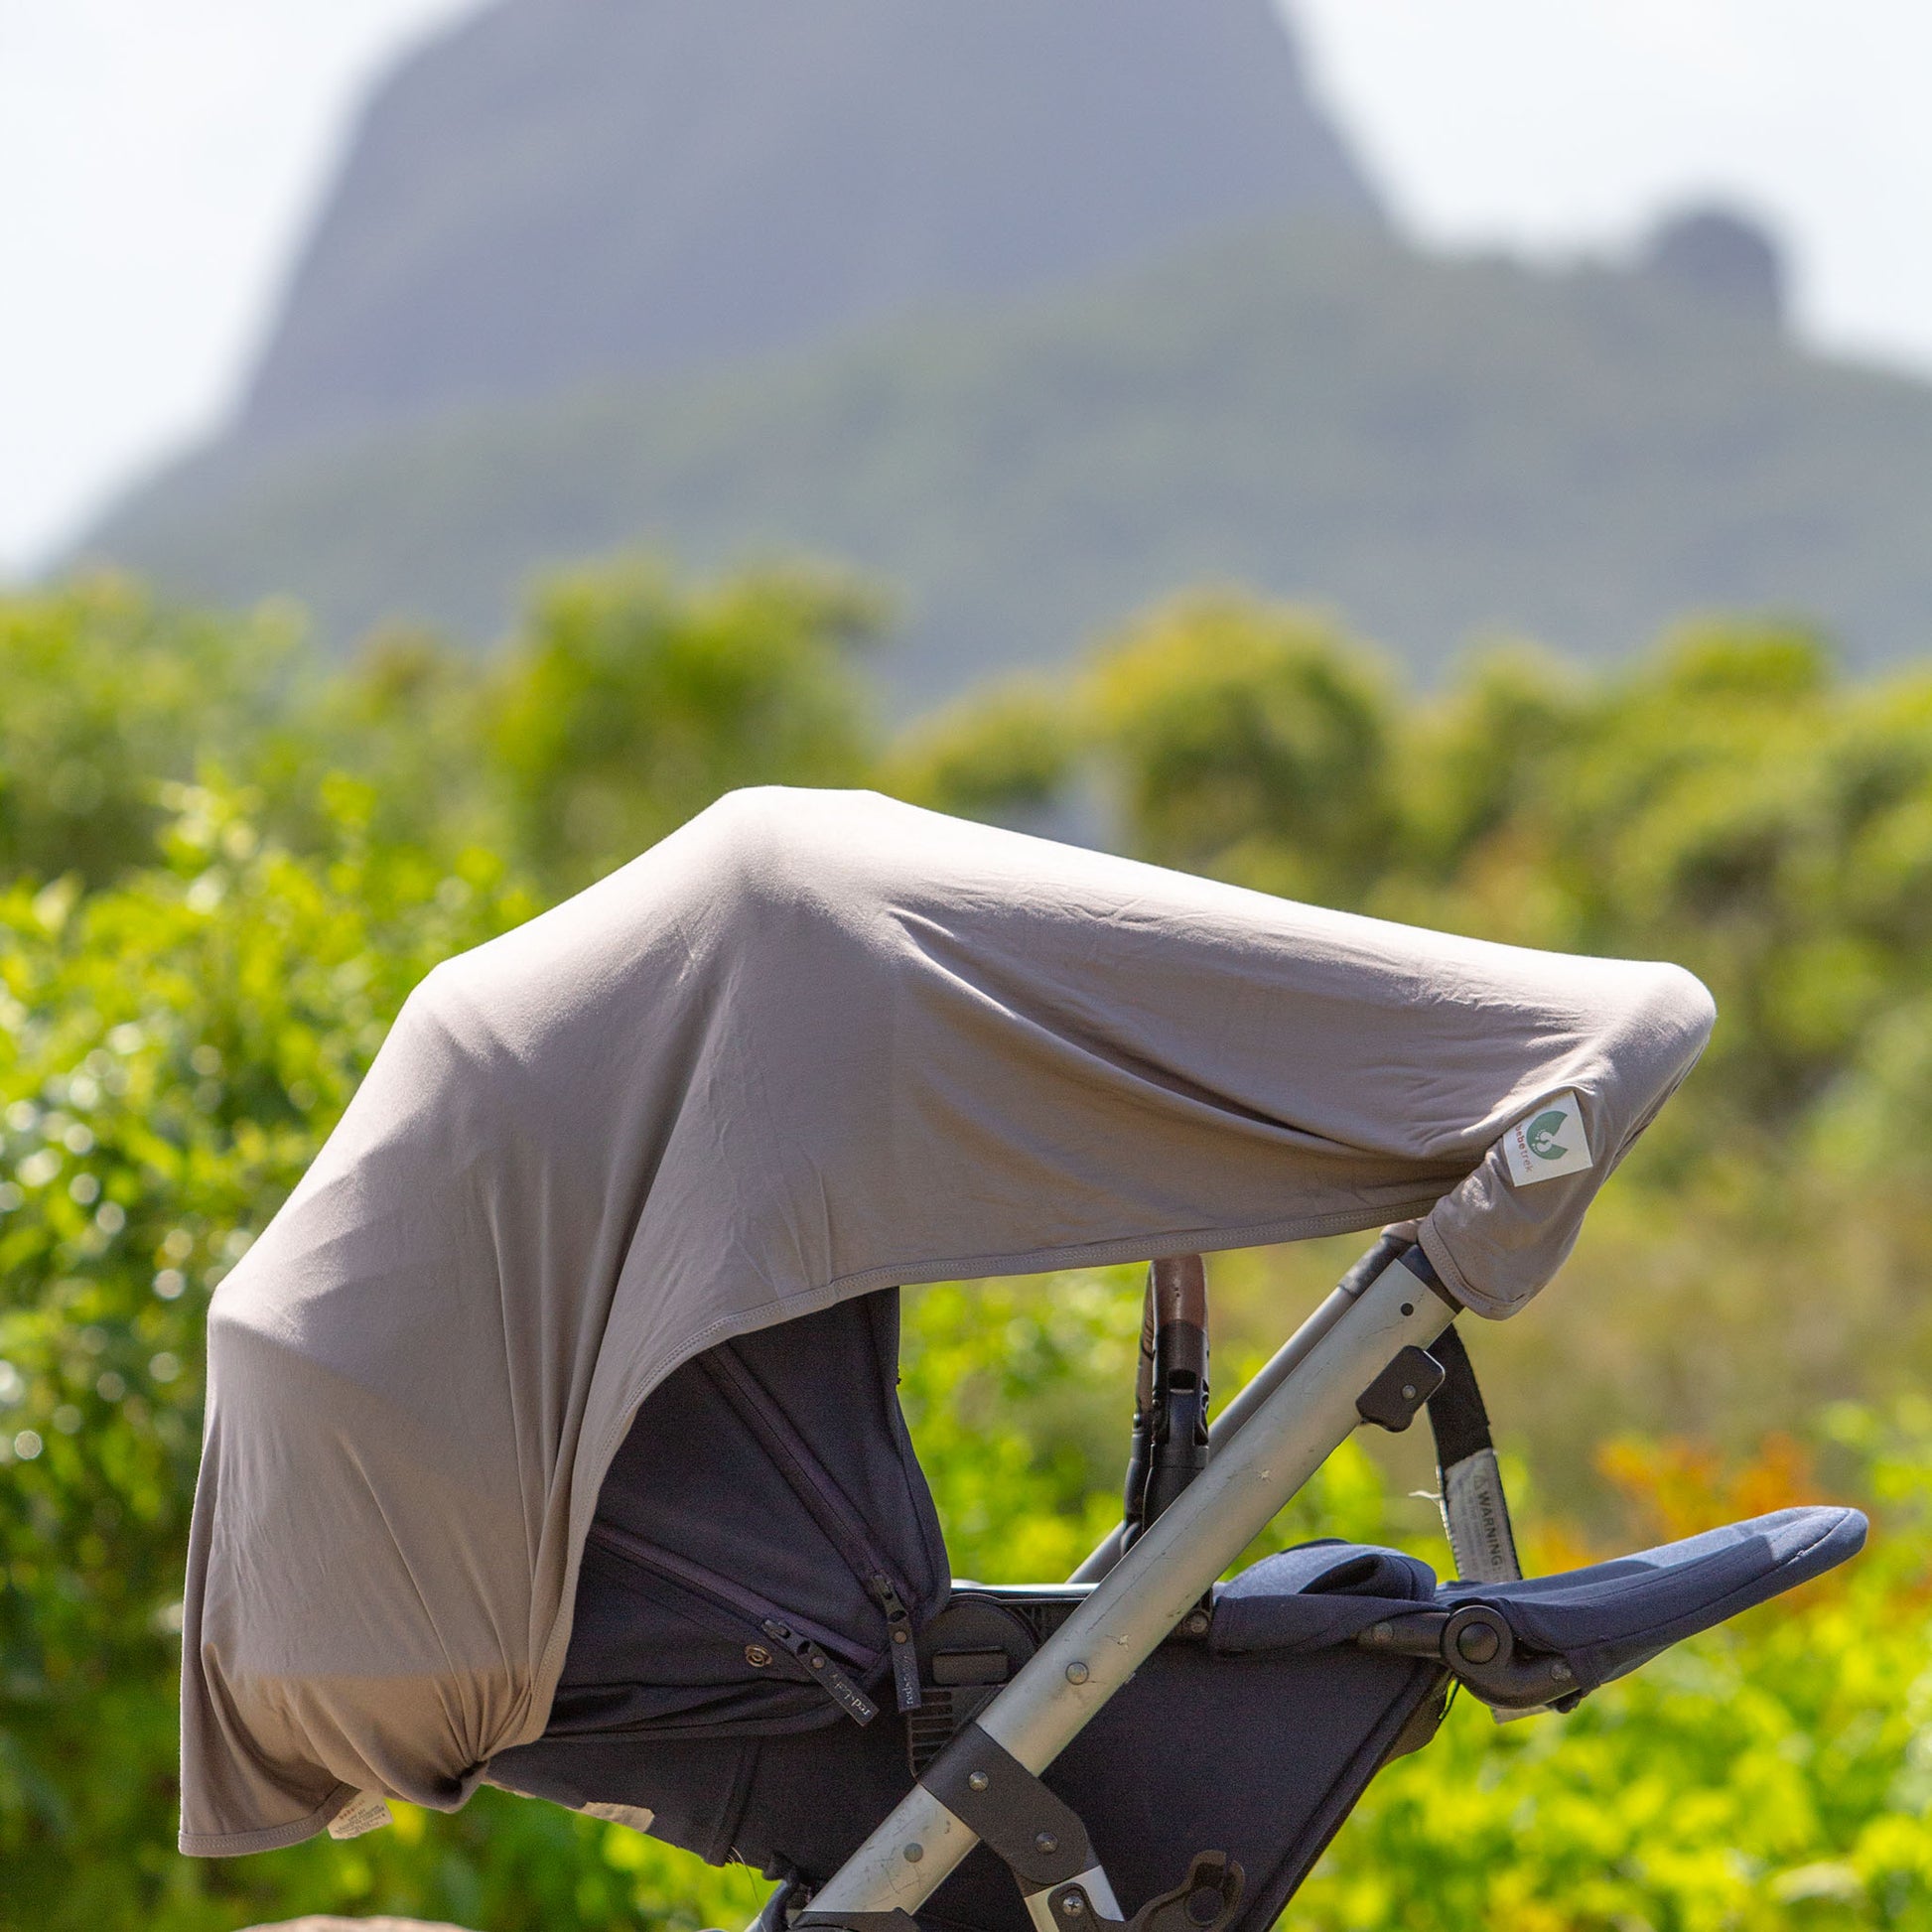 The Bebe Trek Multifunctional magnetic sun cover in earth grey being used a pram shade cover.